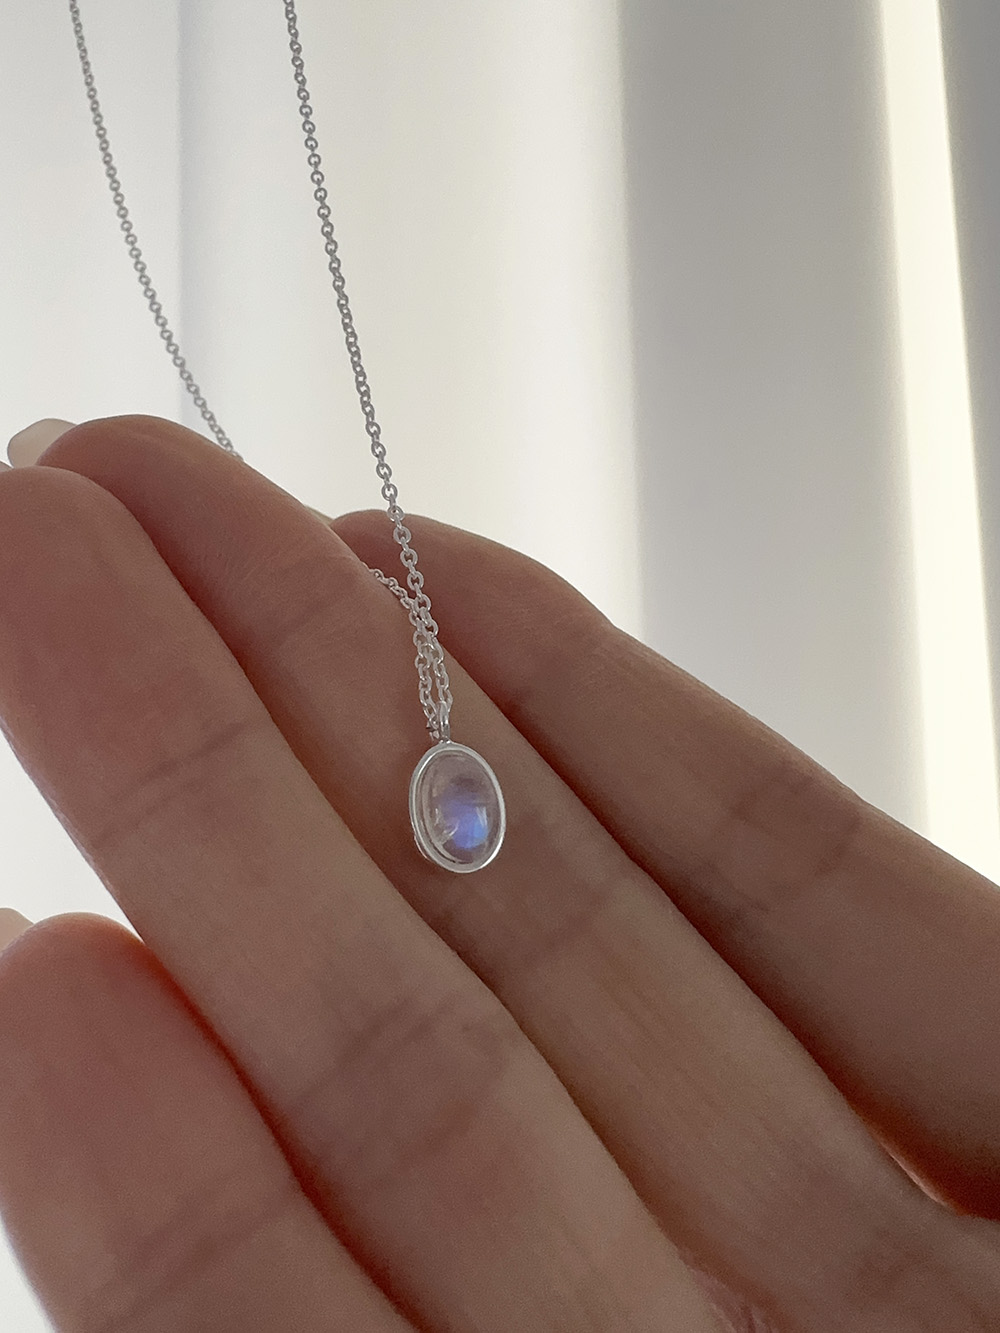 [92.5 silver] Small moonstone necklace